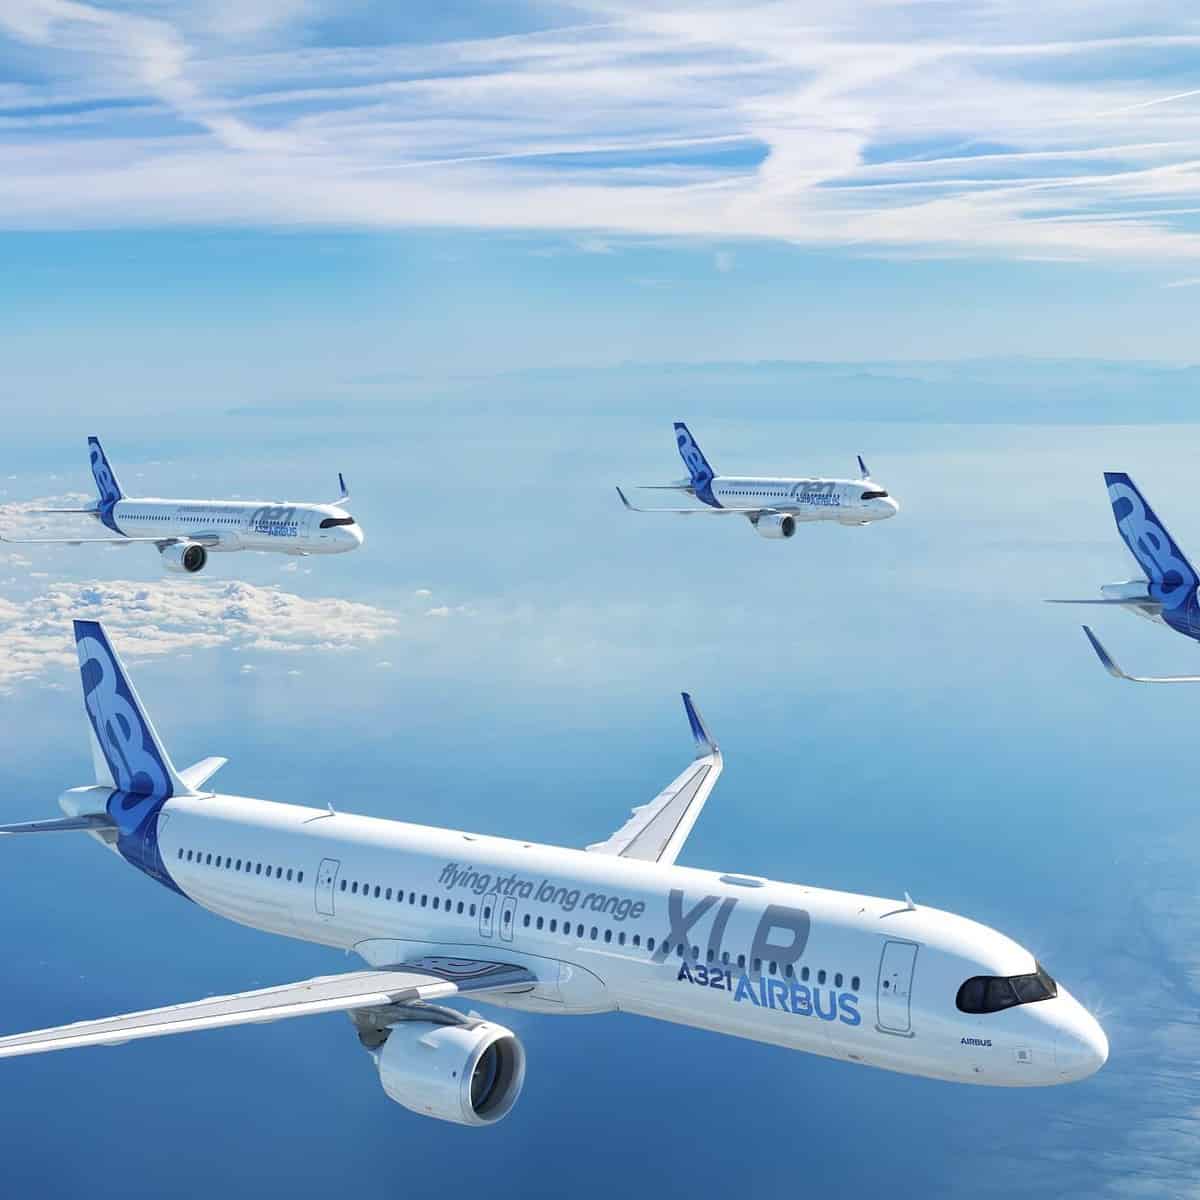 BOC Aviation orders 80 new jets from Airbus